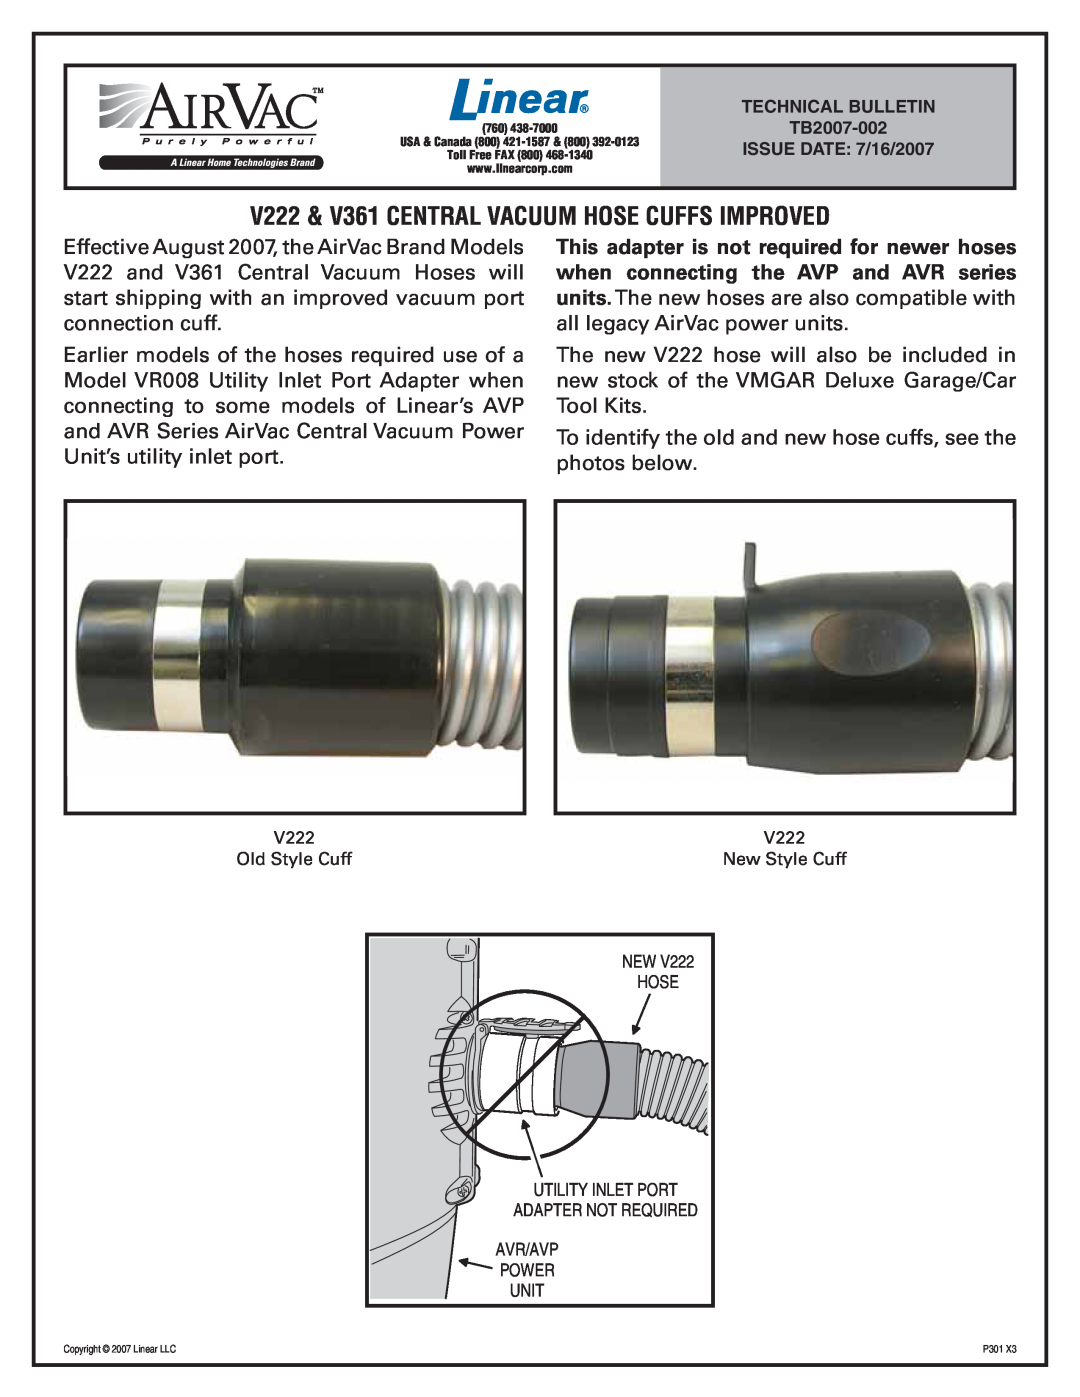 Linear manual V222 & V361 CENTRAL VACUUM HOSE CUFFS IMPROVED, TECHNICAL BULLETIN TB2007-002, ISSUE DATE 7/16/2007 